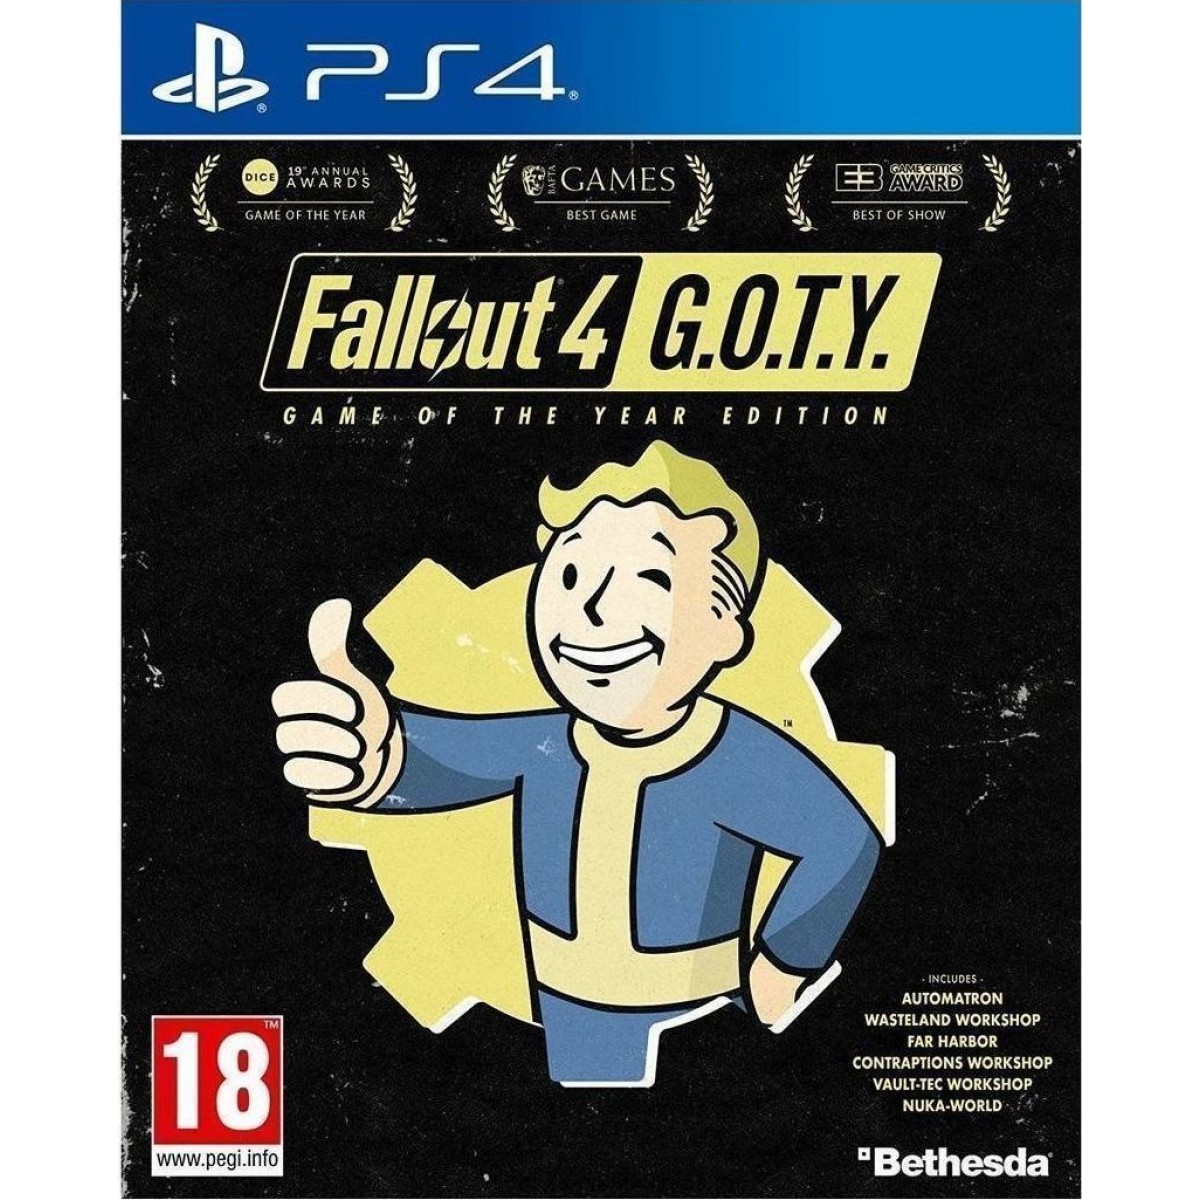 PS4 FALLOUT 4 GAME OF THE YEAR GAME